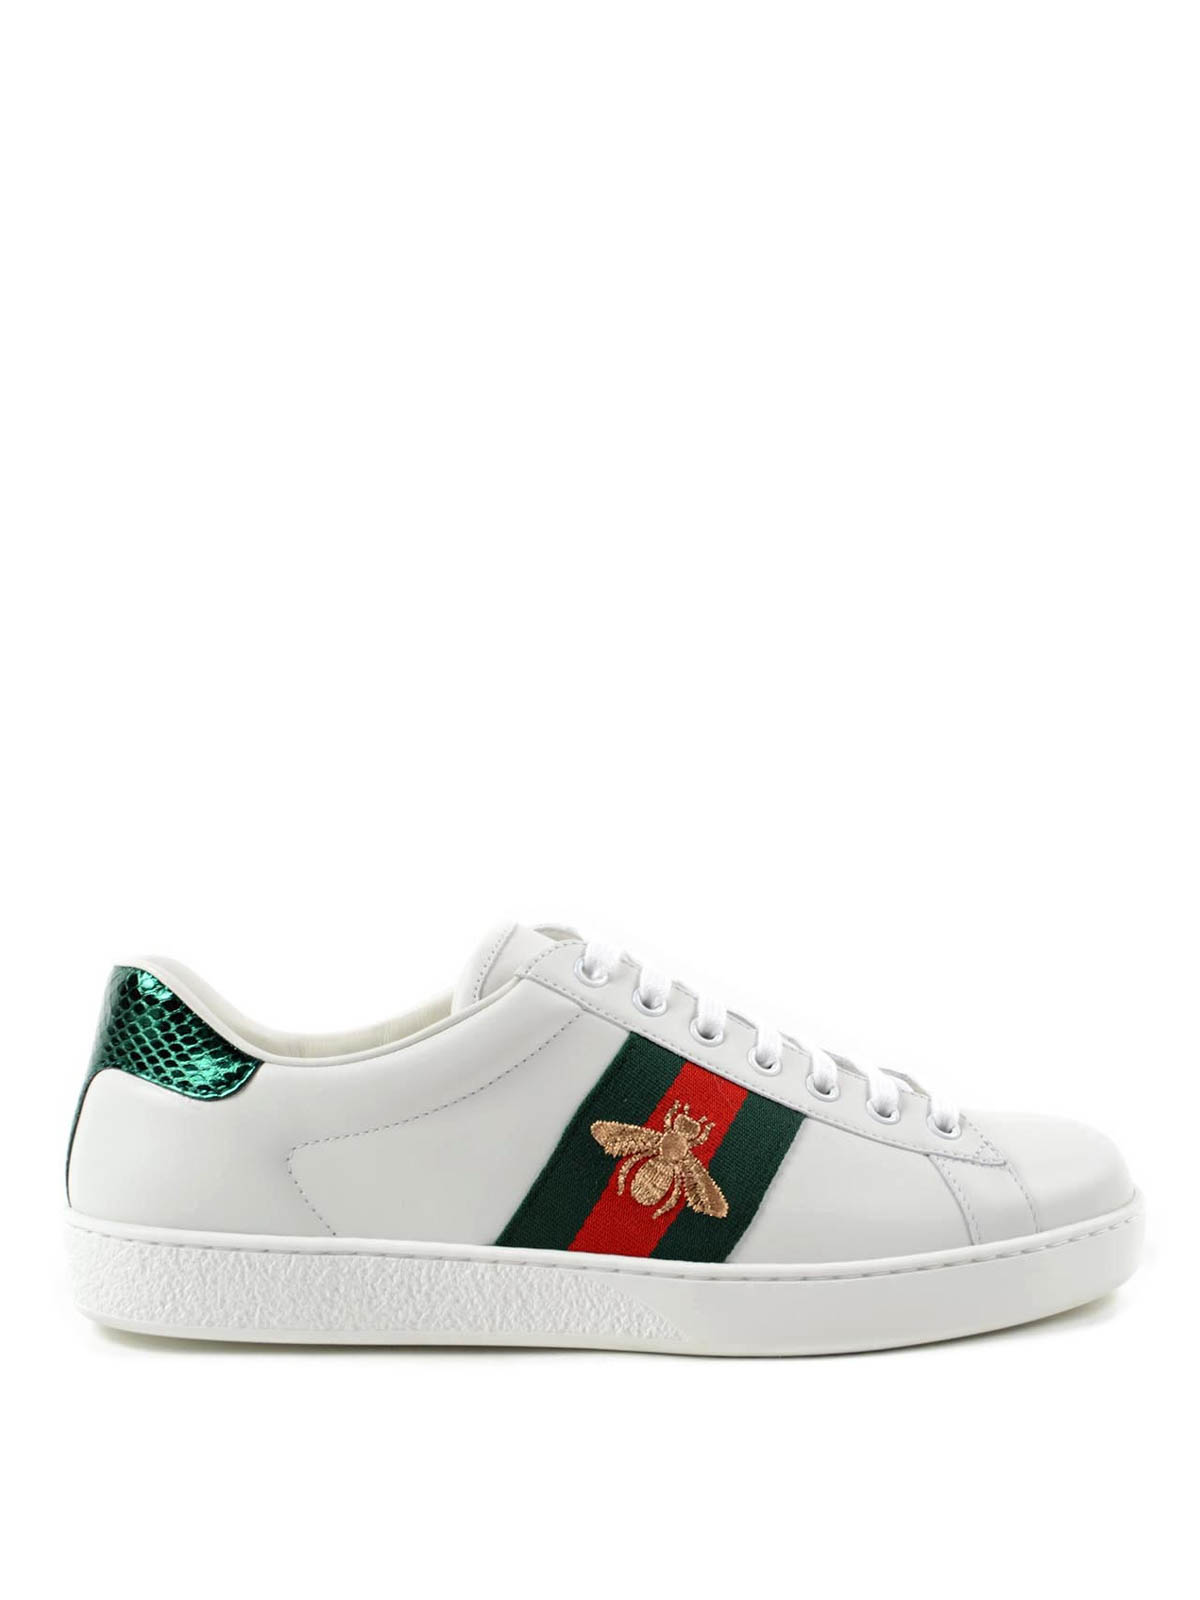 Gucci - Bee detailed leather sneakers - trainers - 429446 A38G0 9064